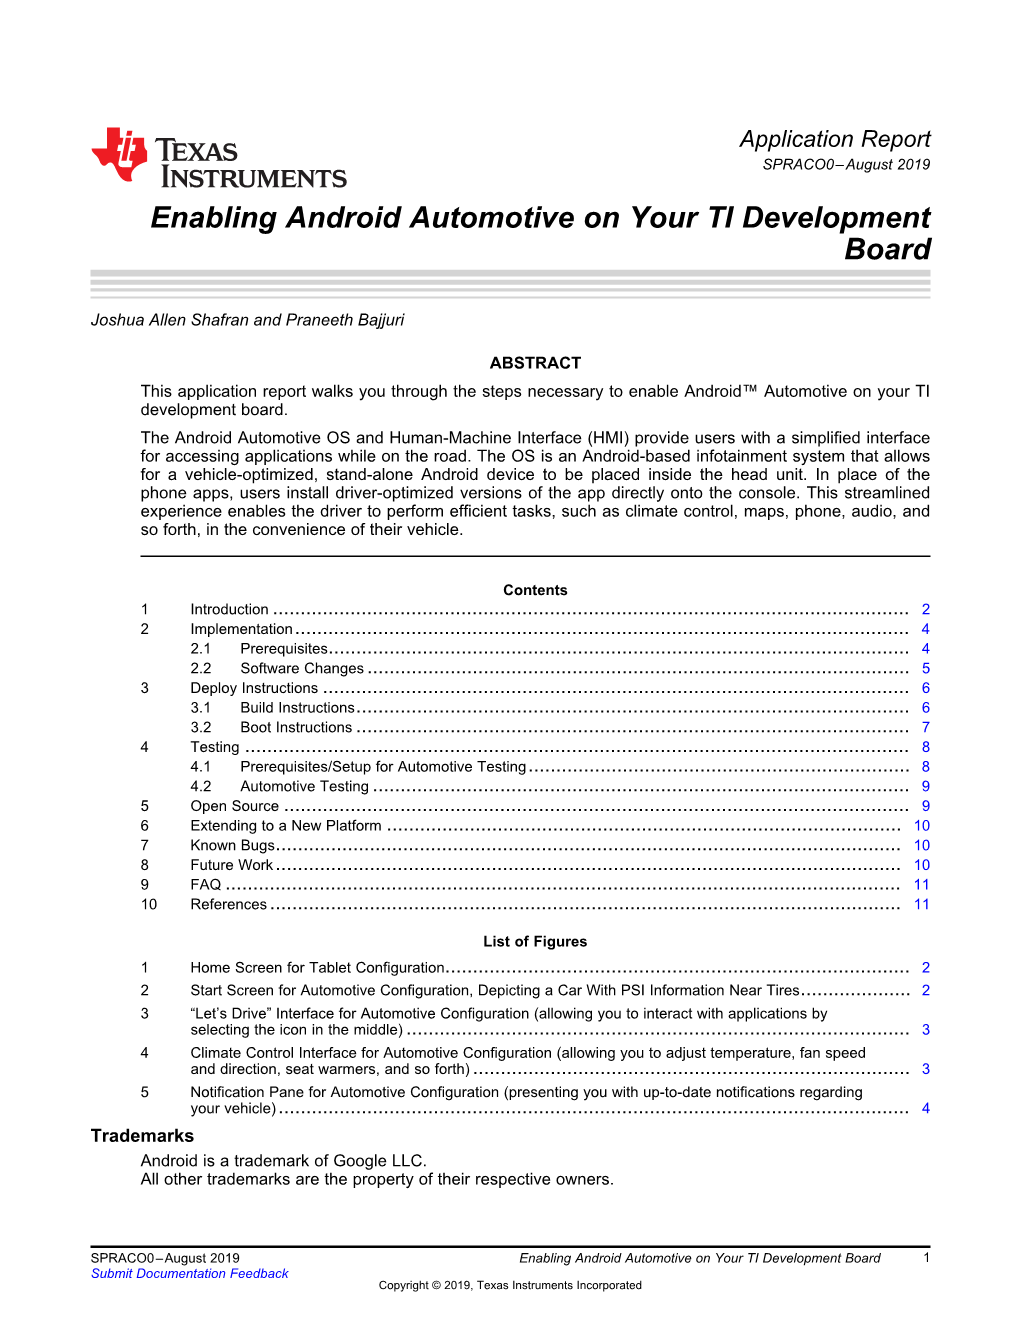 Enabling Android Automotive on Your TI Development Board